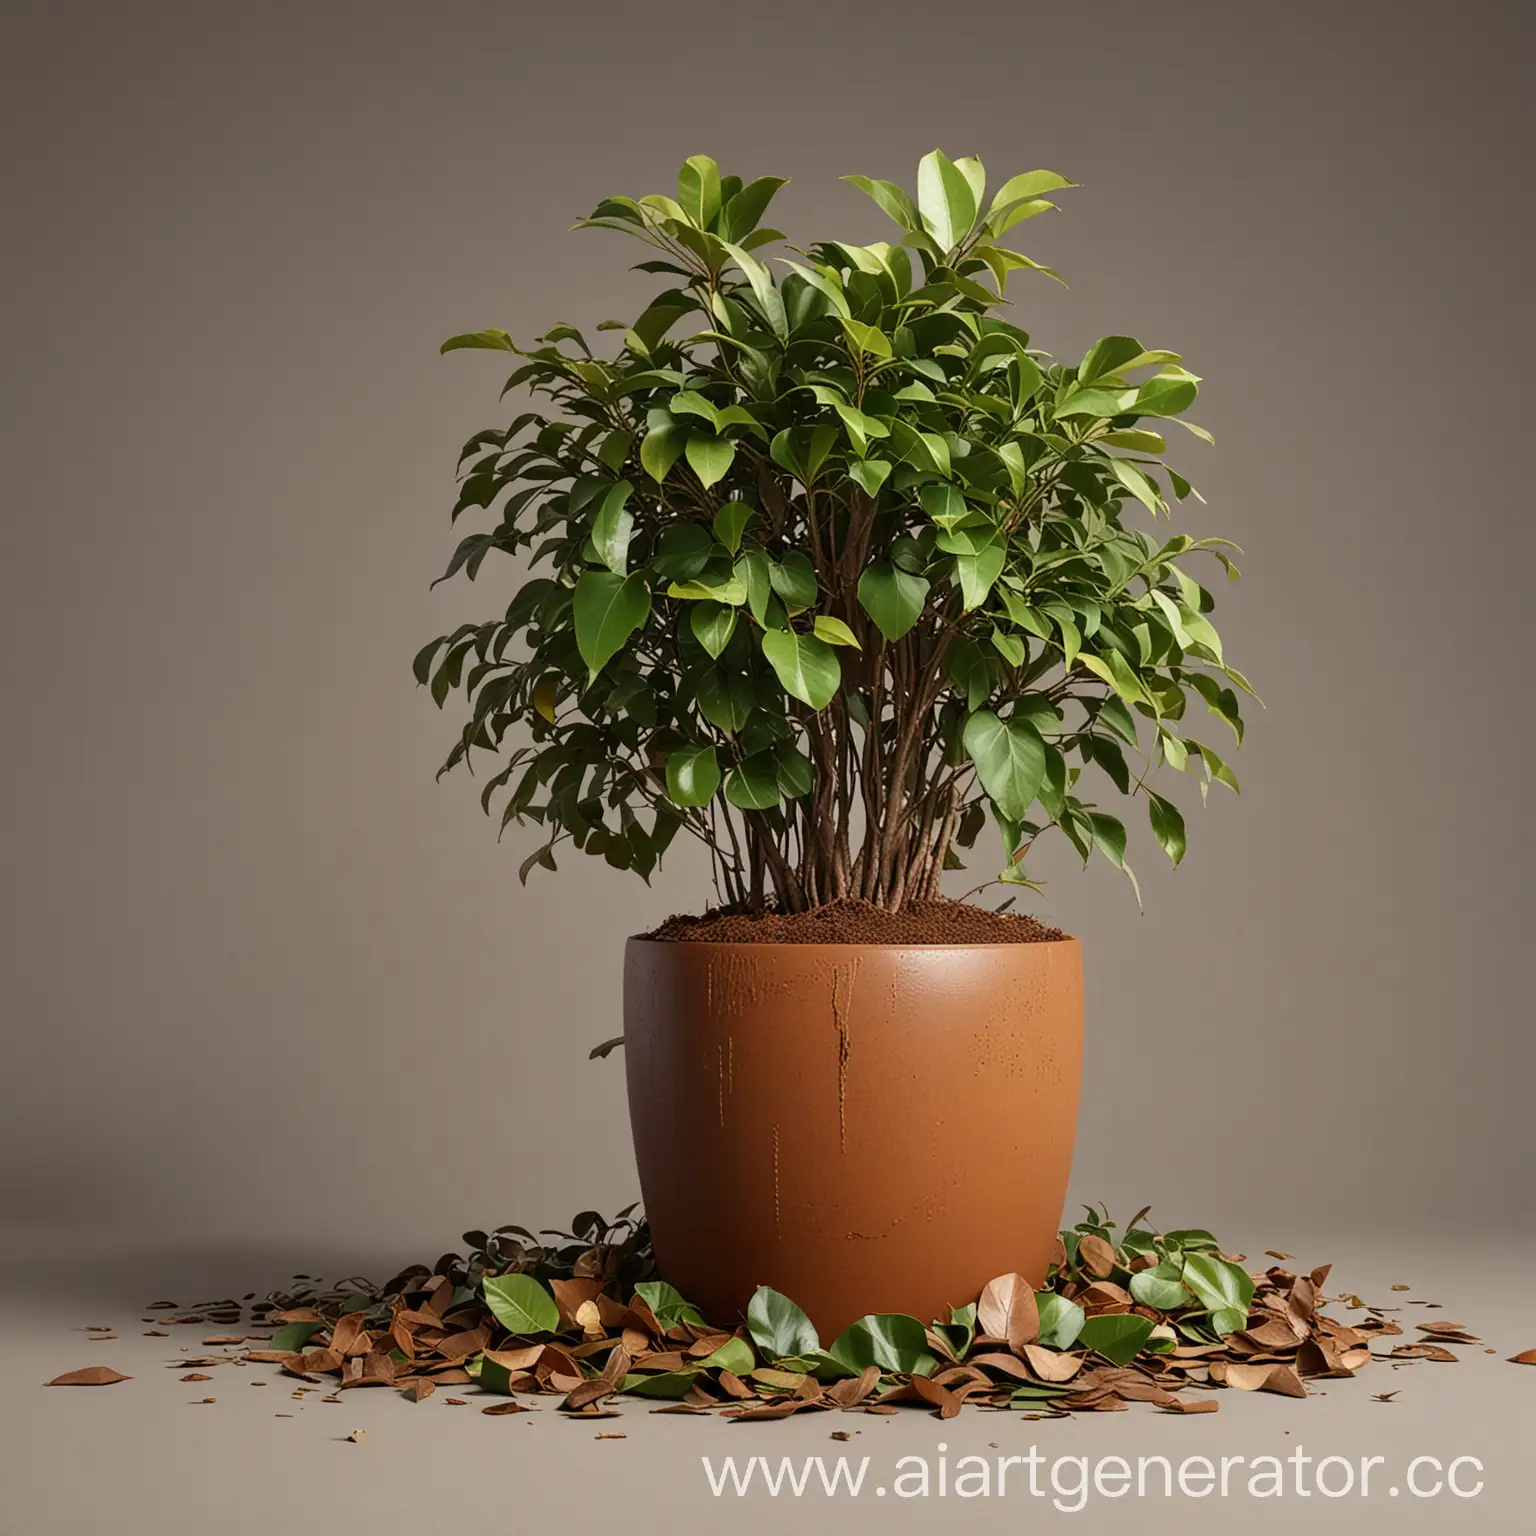 Ficus-Plant-in-Distress-Fallen-Leaves-Surrounding-a-Brown-Pot